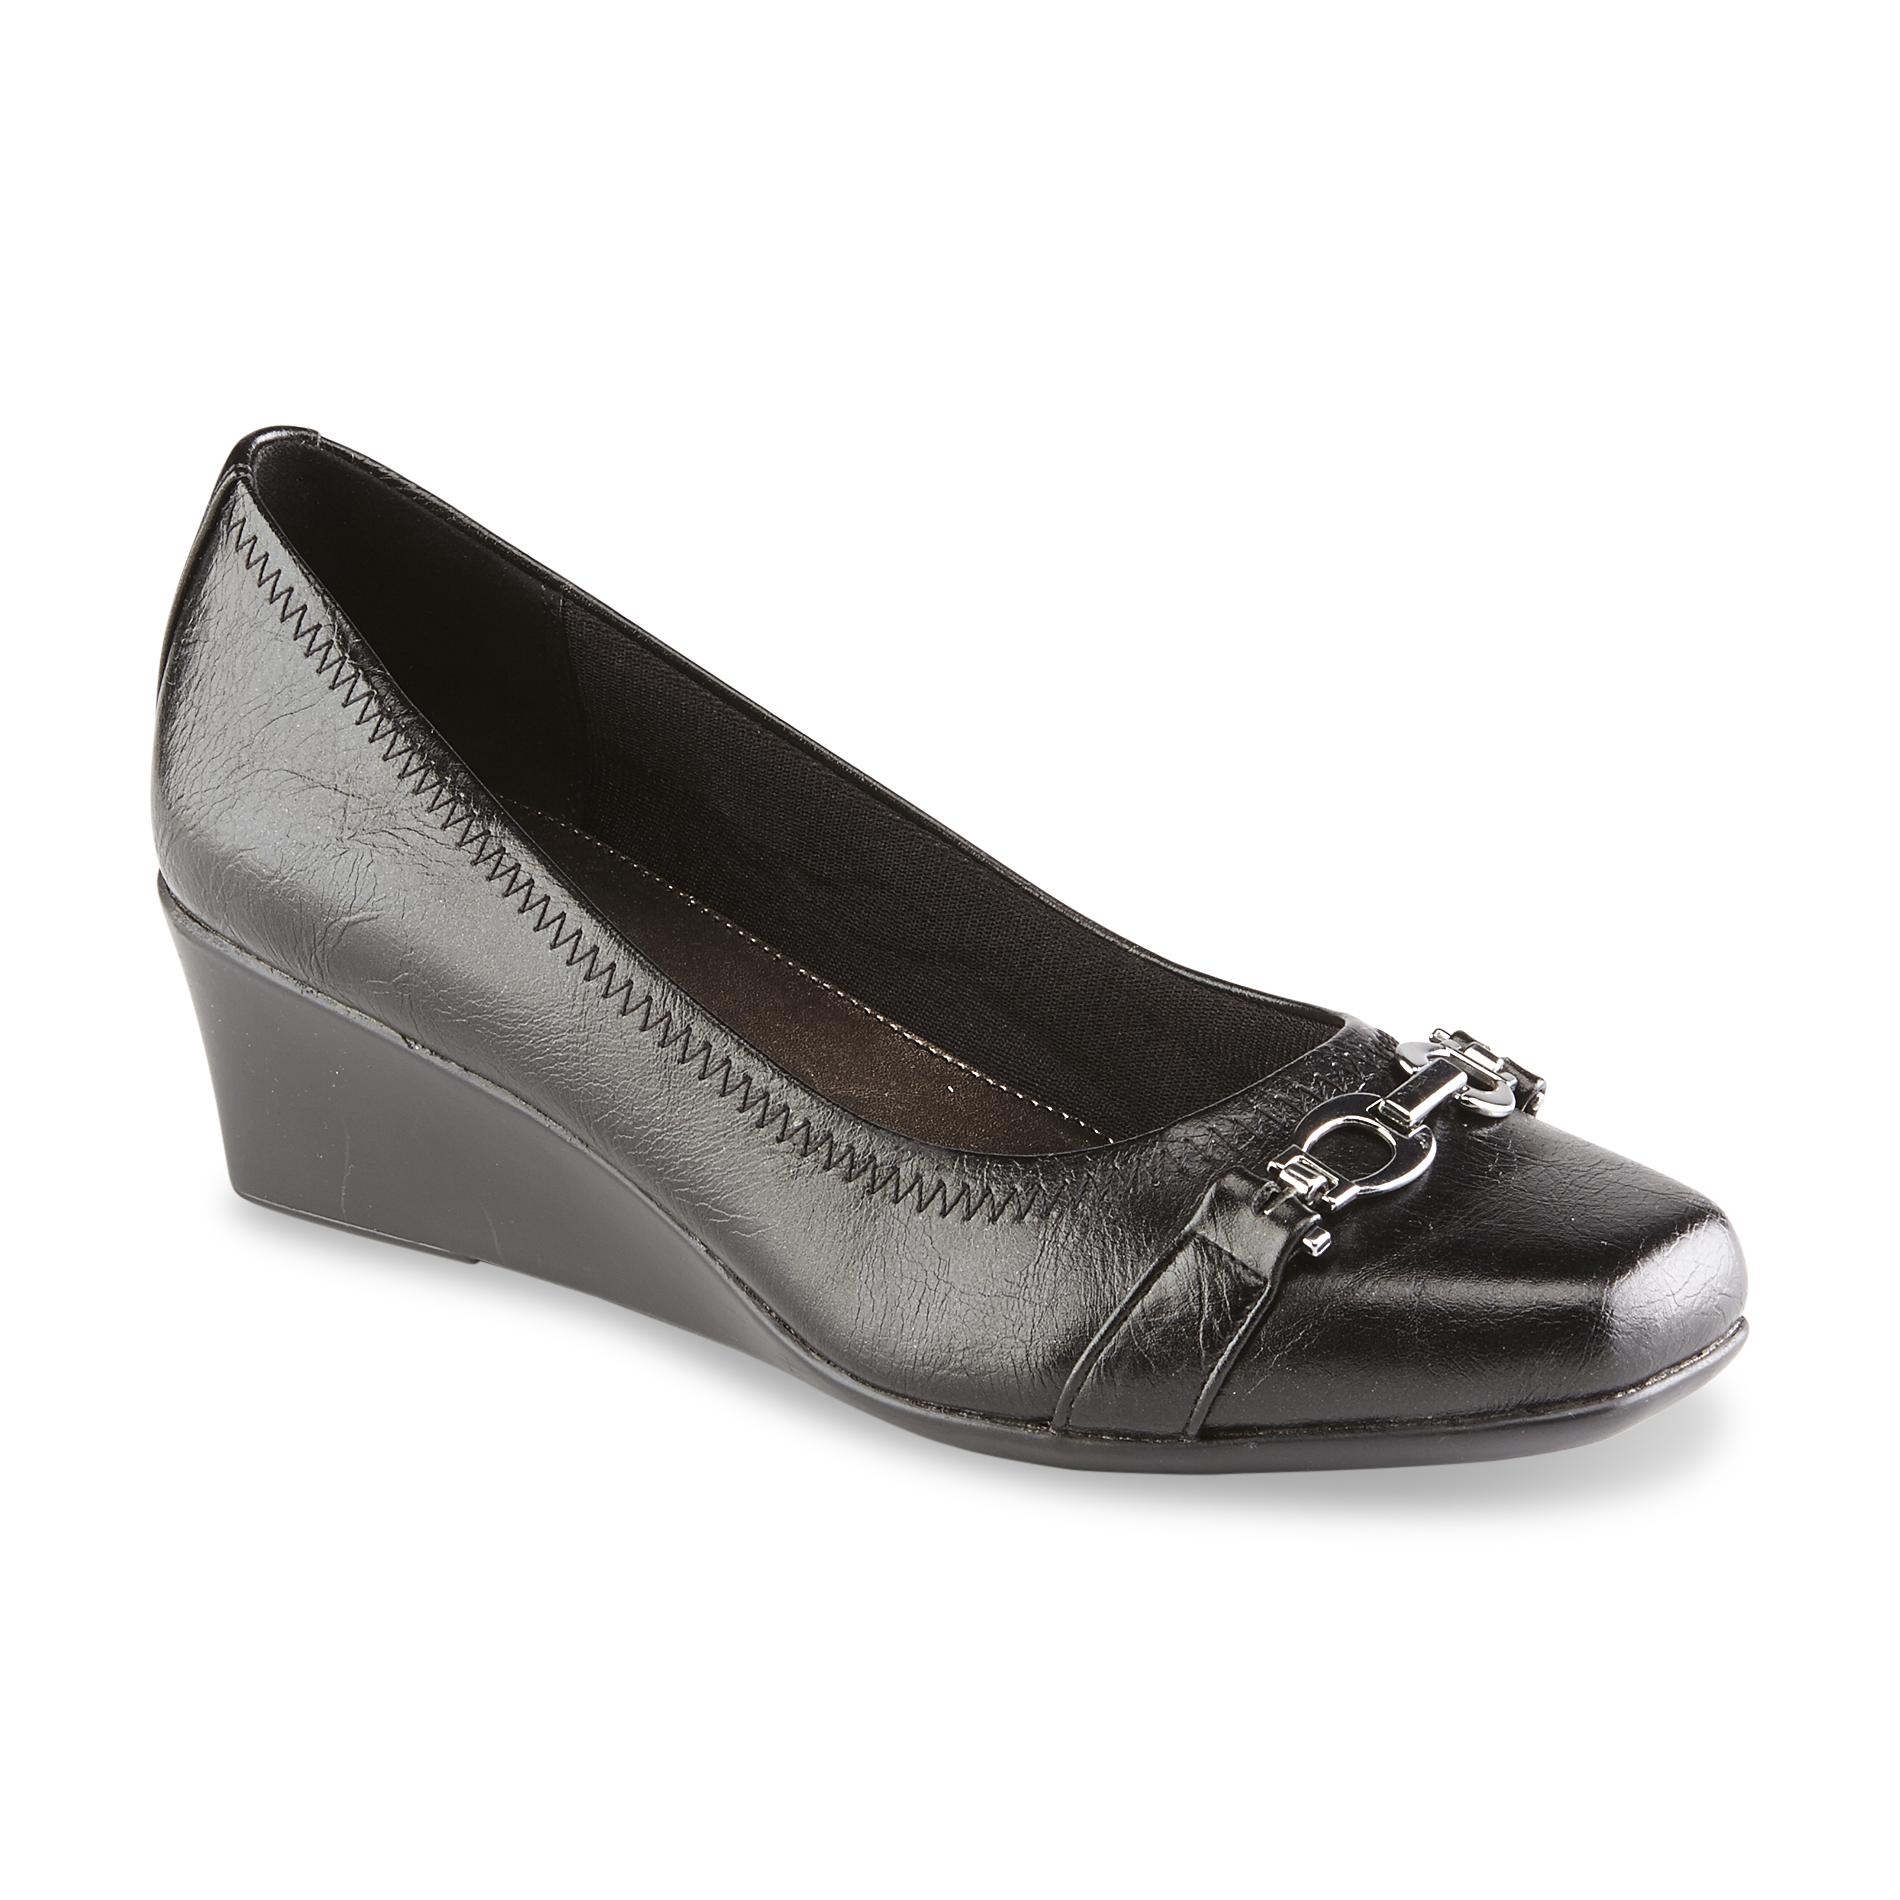 LifeStride Women's Galso Black Wedge Loafer Shop Your Way Online Shopping & Earn Points on